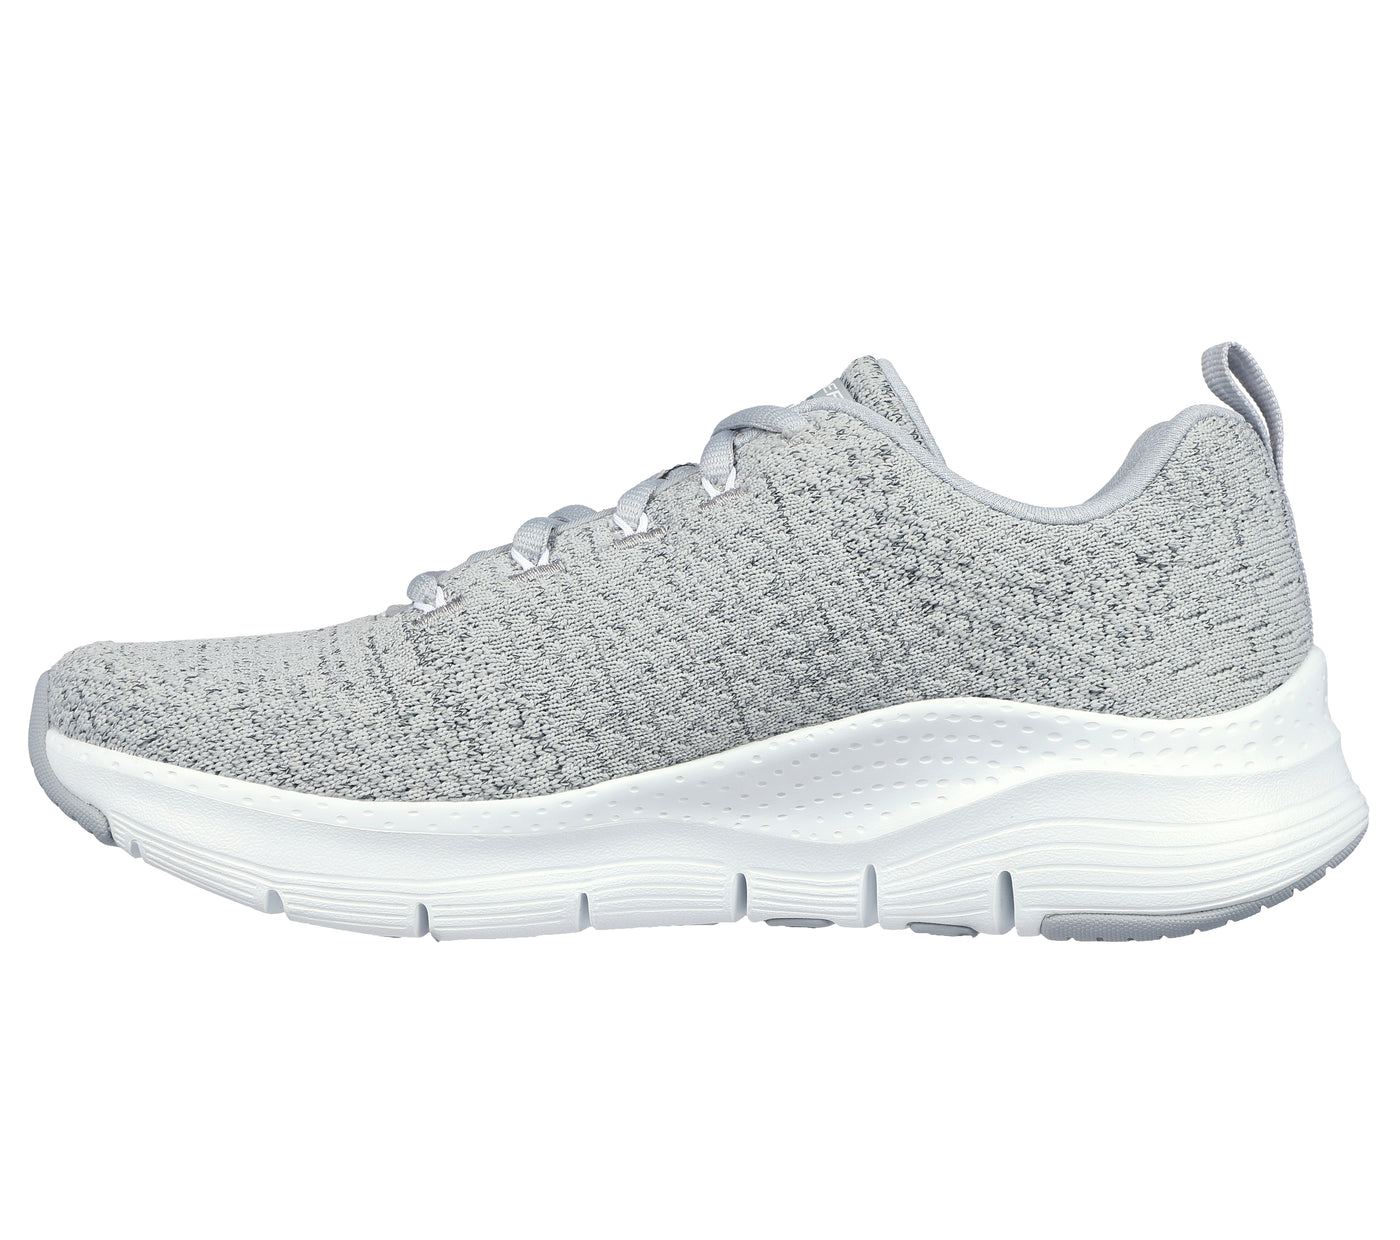 Women's Skechers Arch Fit Glee For All Walking Shoes